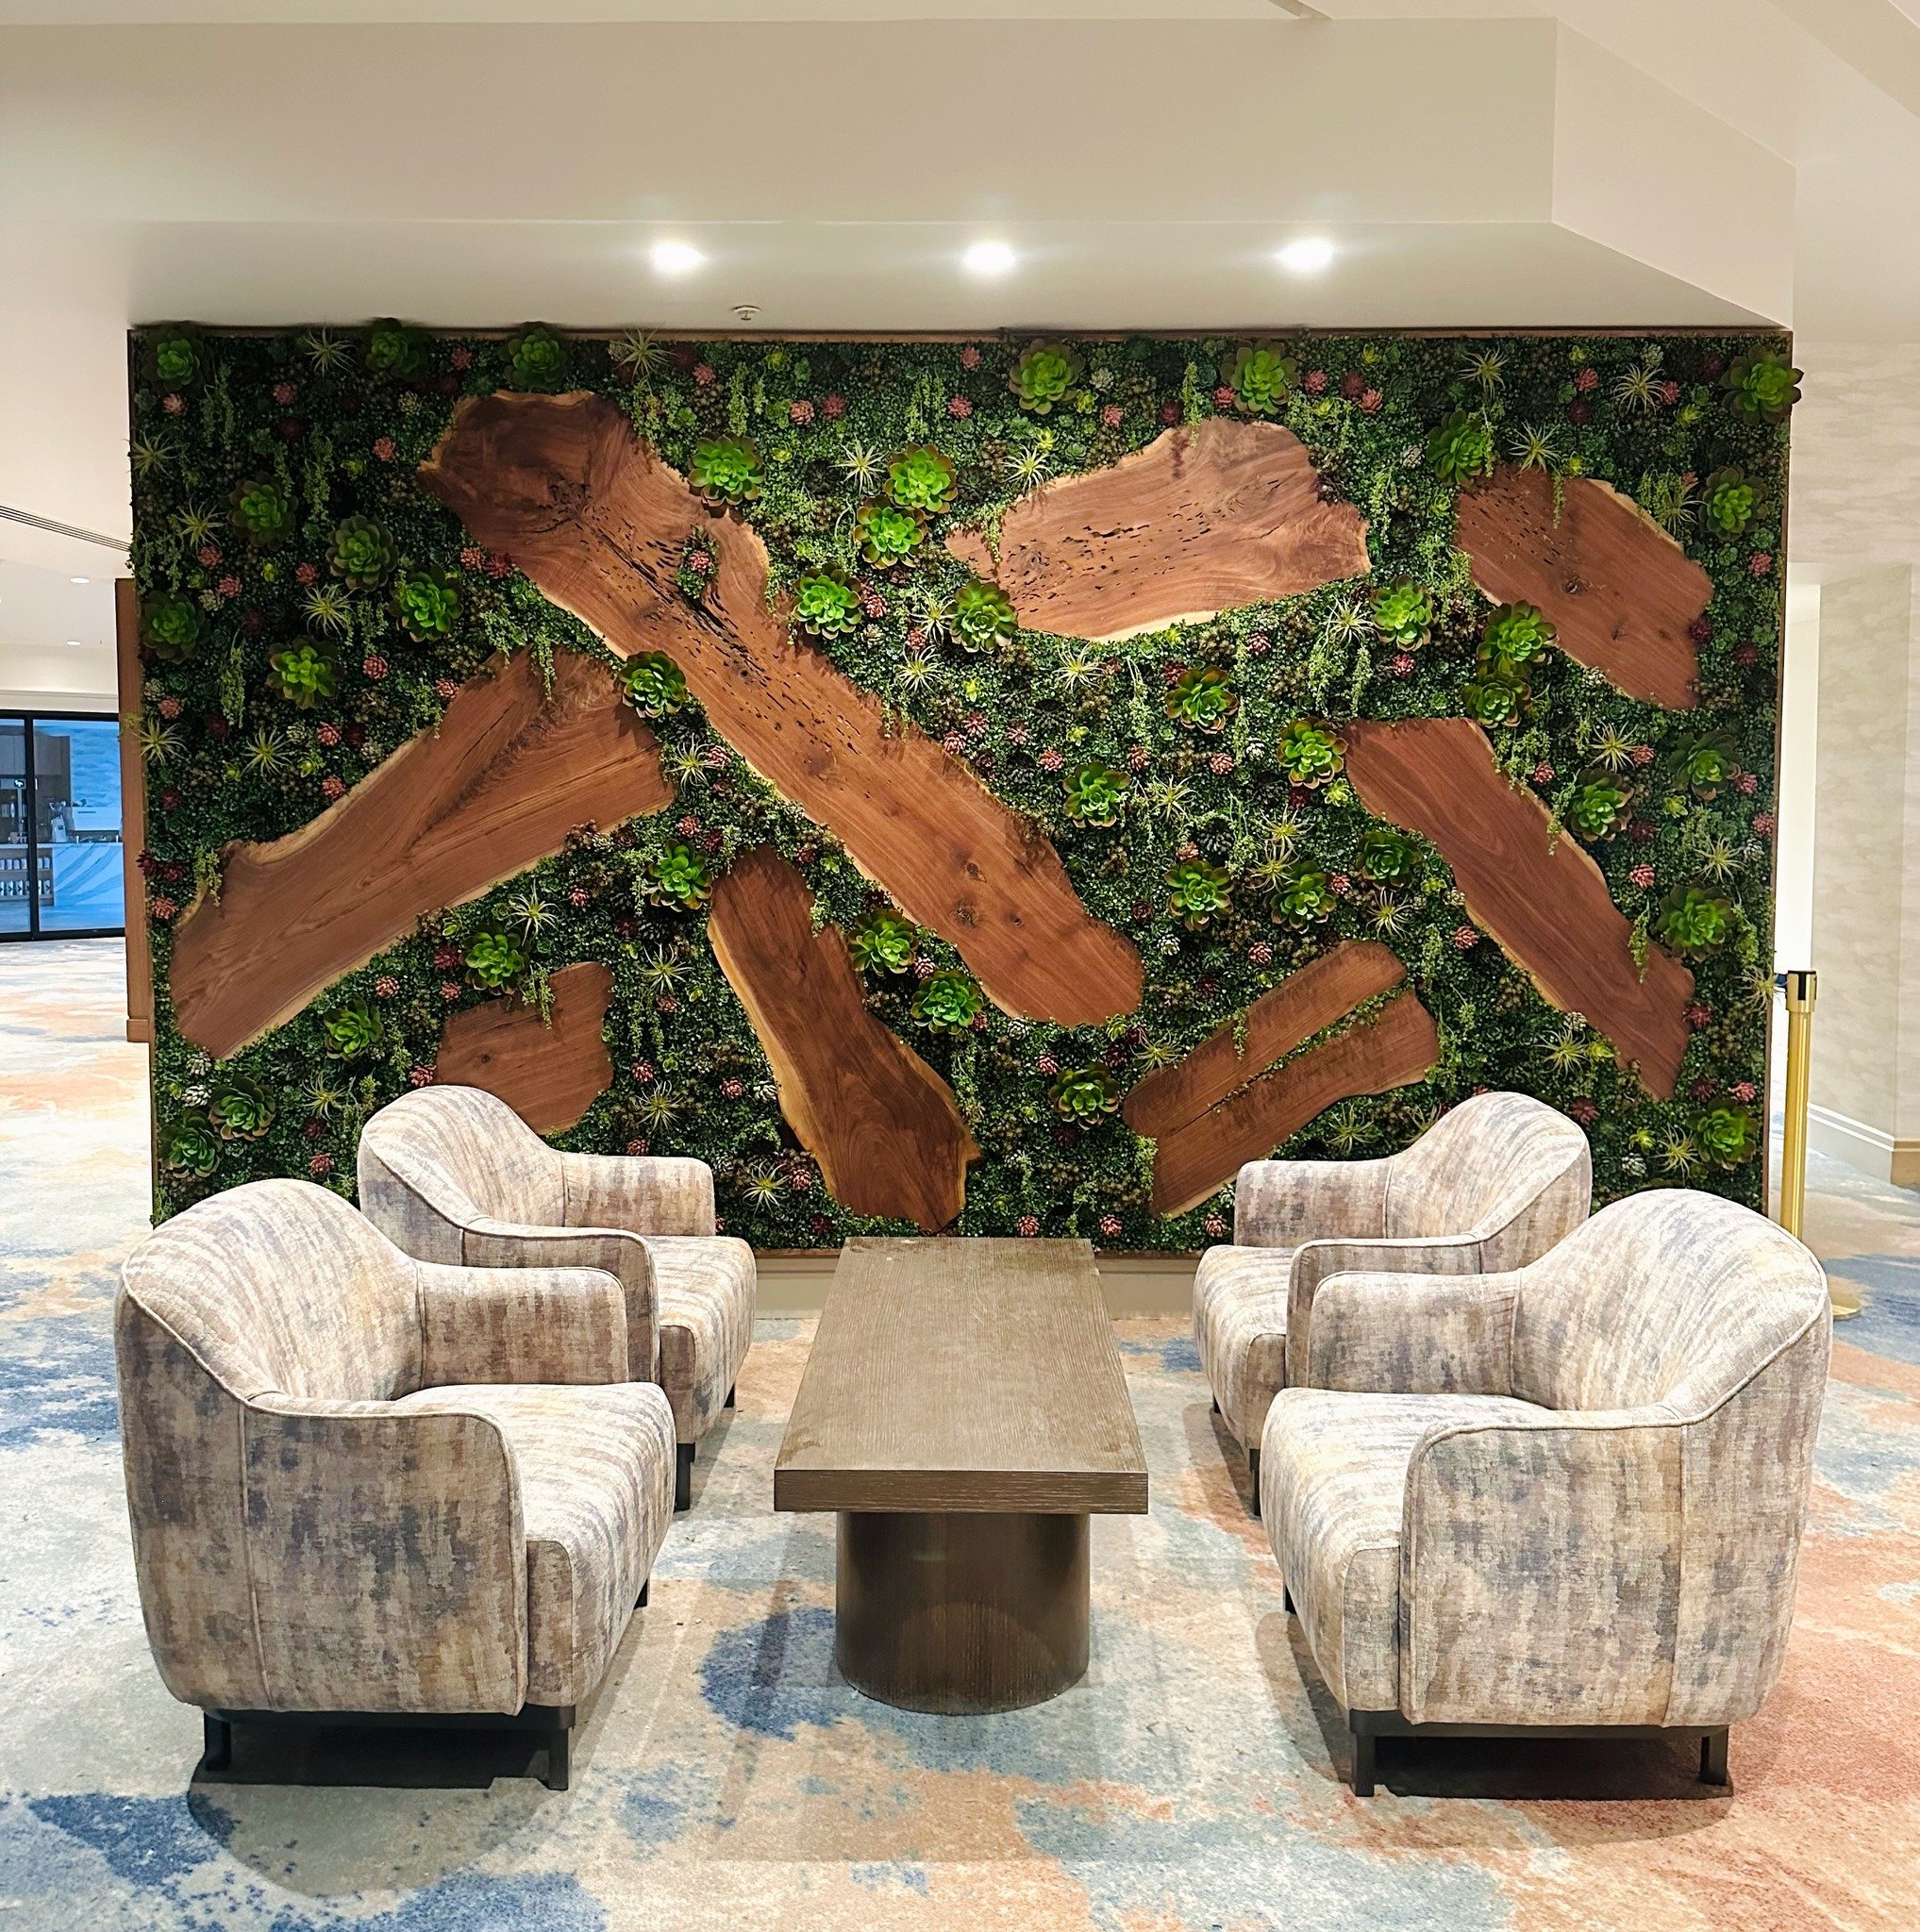 So proud of the team for coming up with a way to execute this project! Earthy elements of boxwood, succulents and walnut wood slabs came together to create this very unique and alluring nature wall.

@marriottbonvoy
@westinlapaloma

 #biophilia #plan